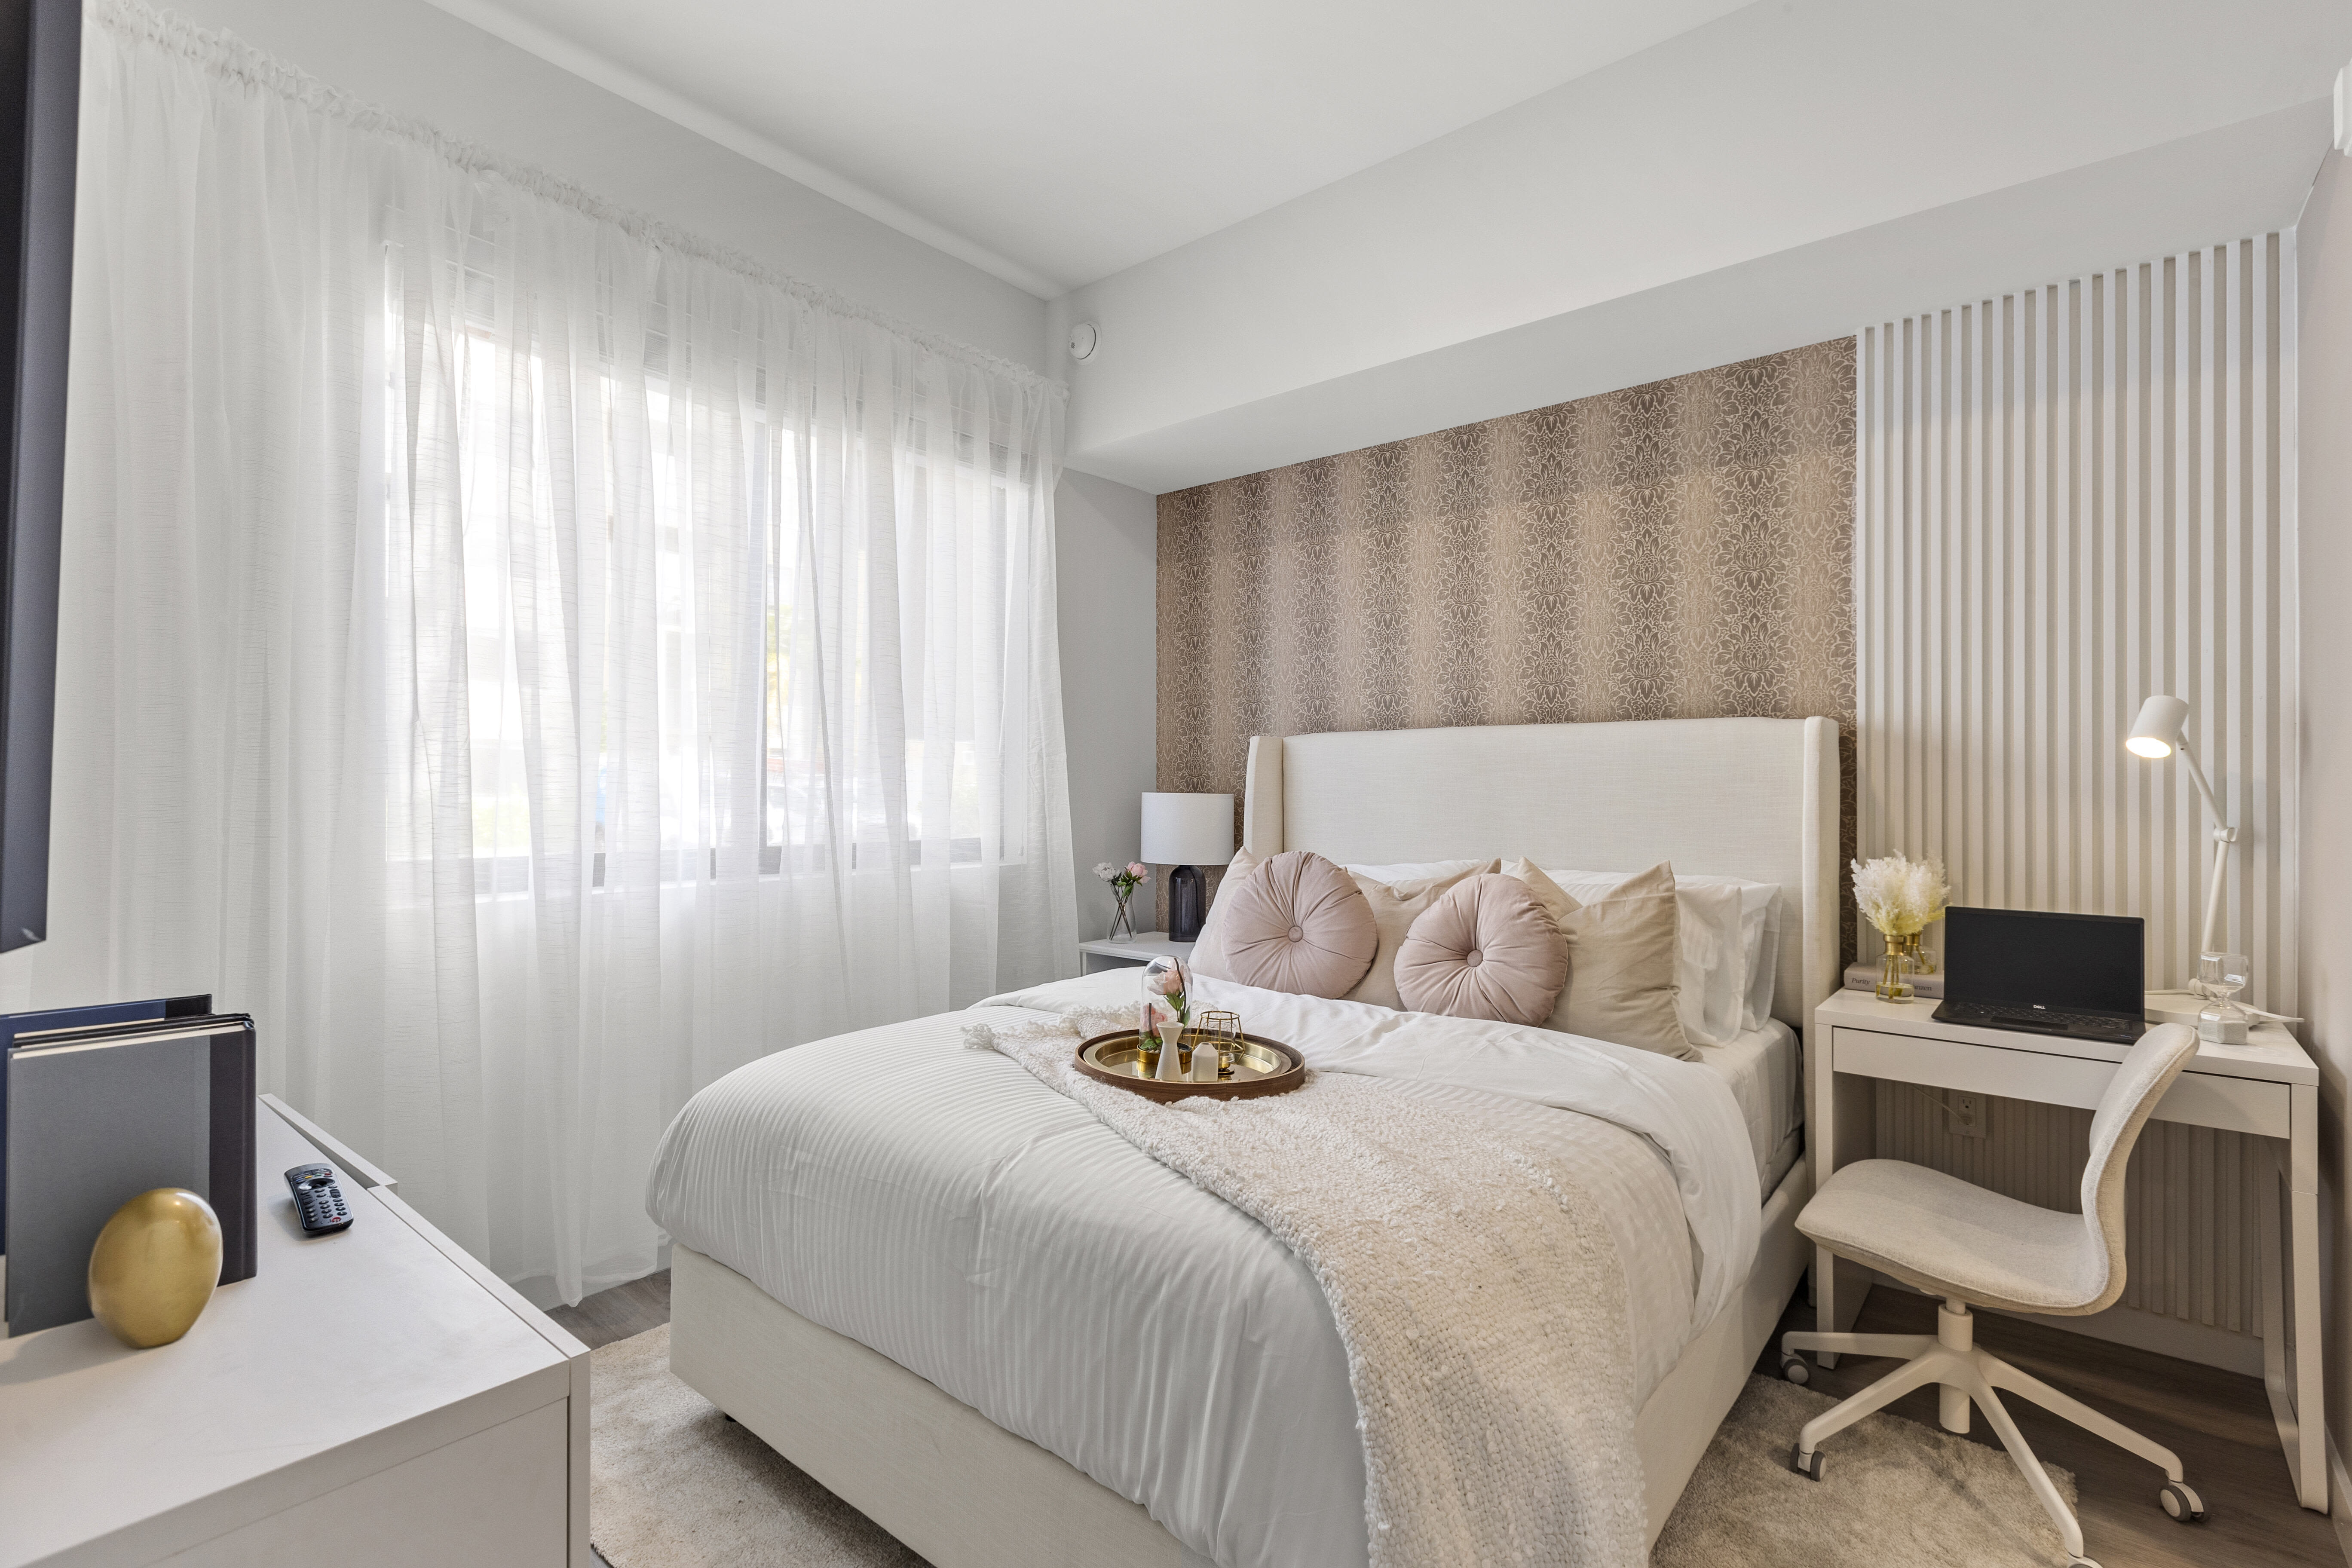 Modern furnishings, natural light, and wood-style flooring create an inviting atmosphere in a furnished apartment model bedroom at Pine Ridge in West Palm Beach, Florida